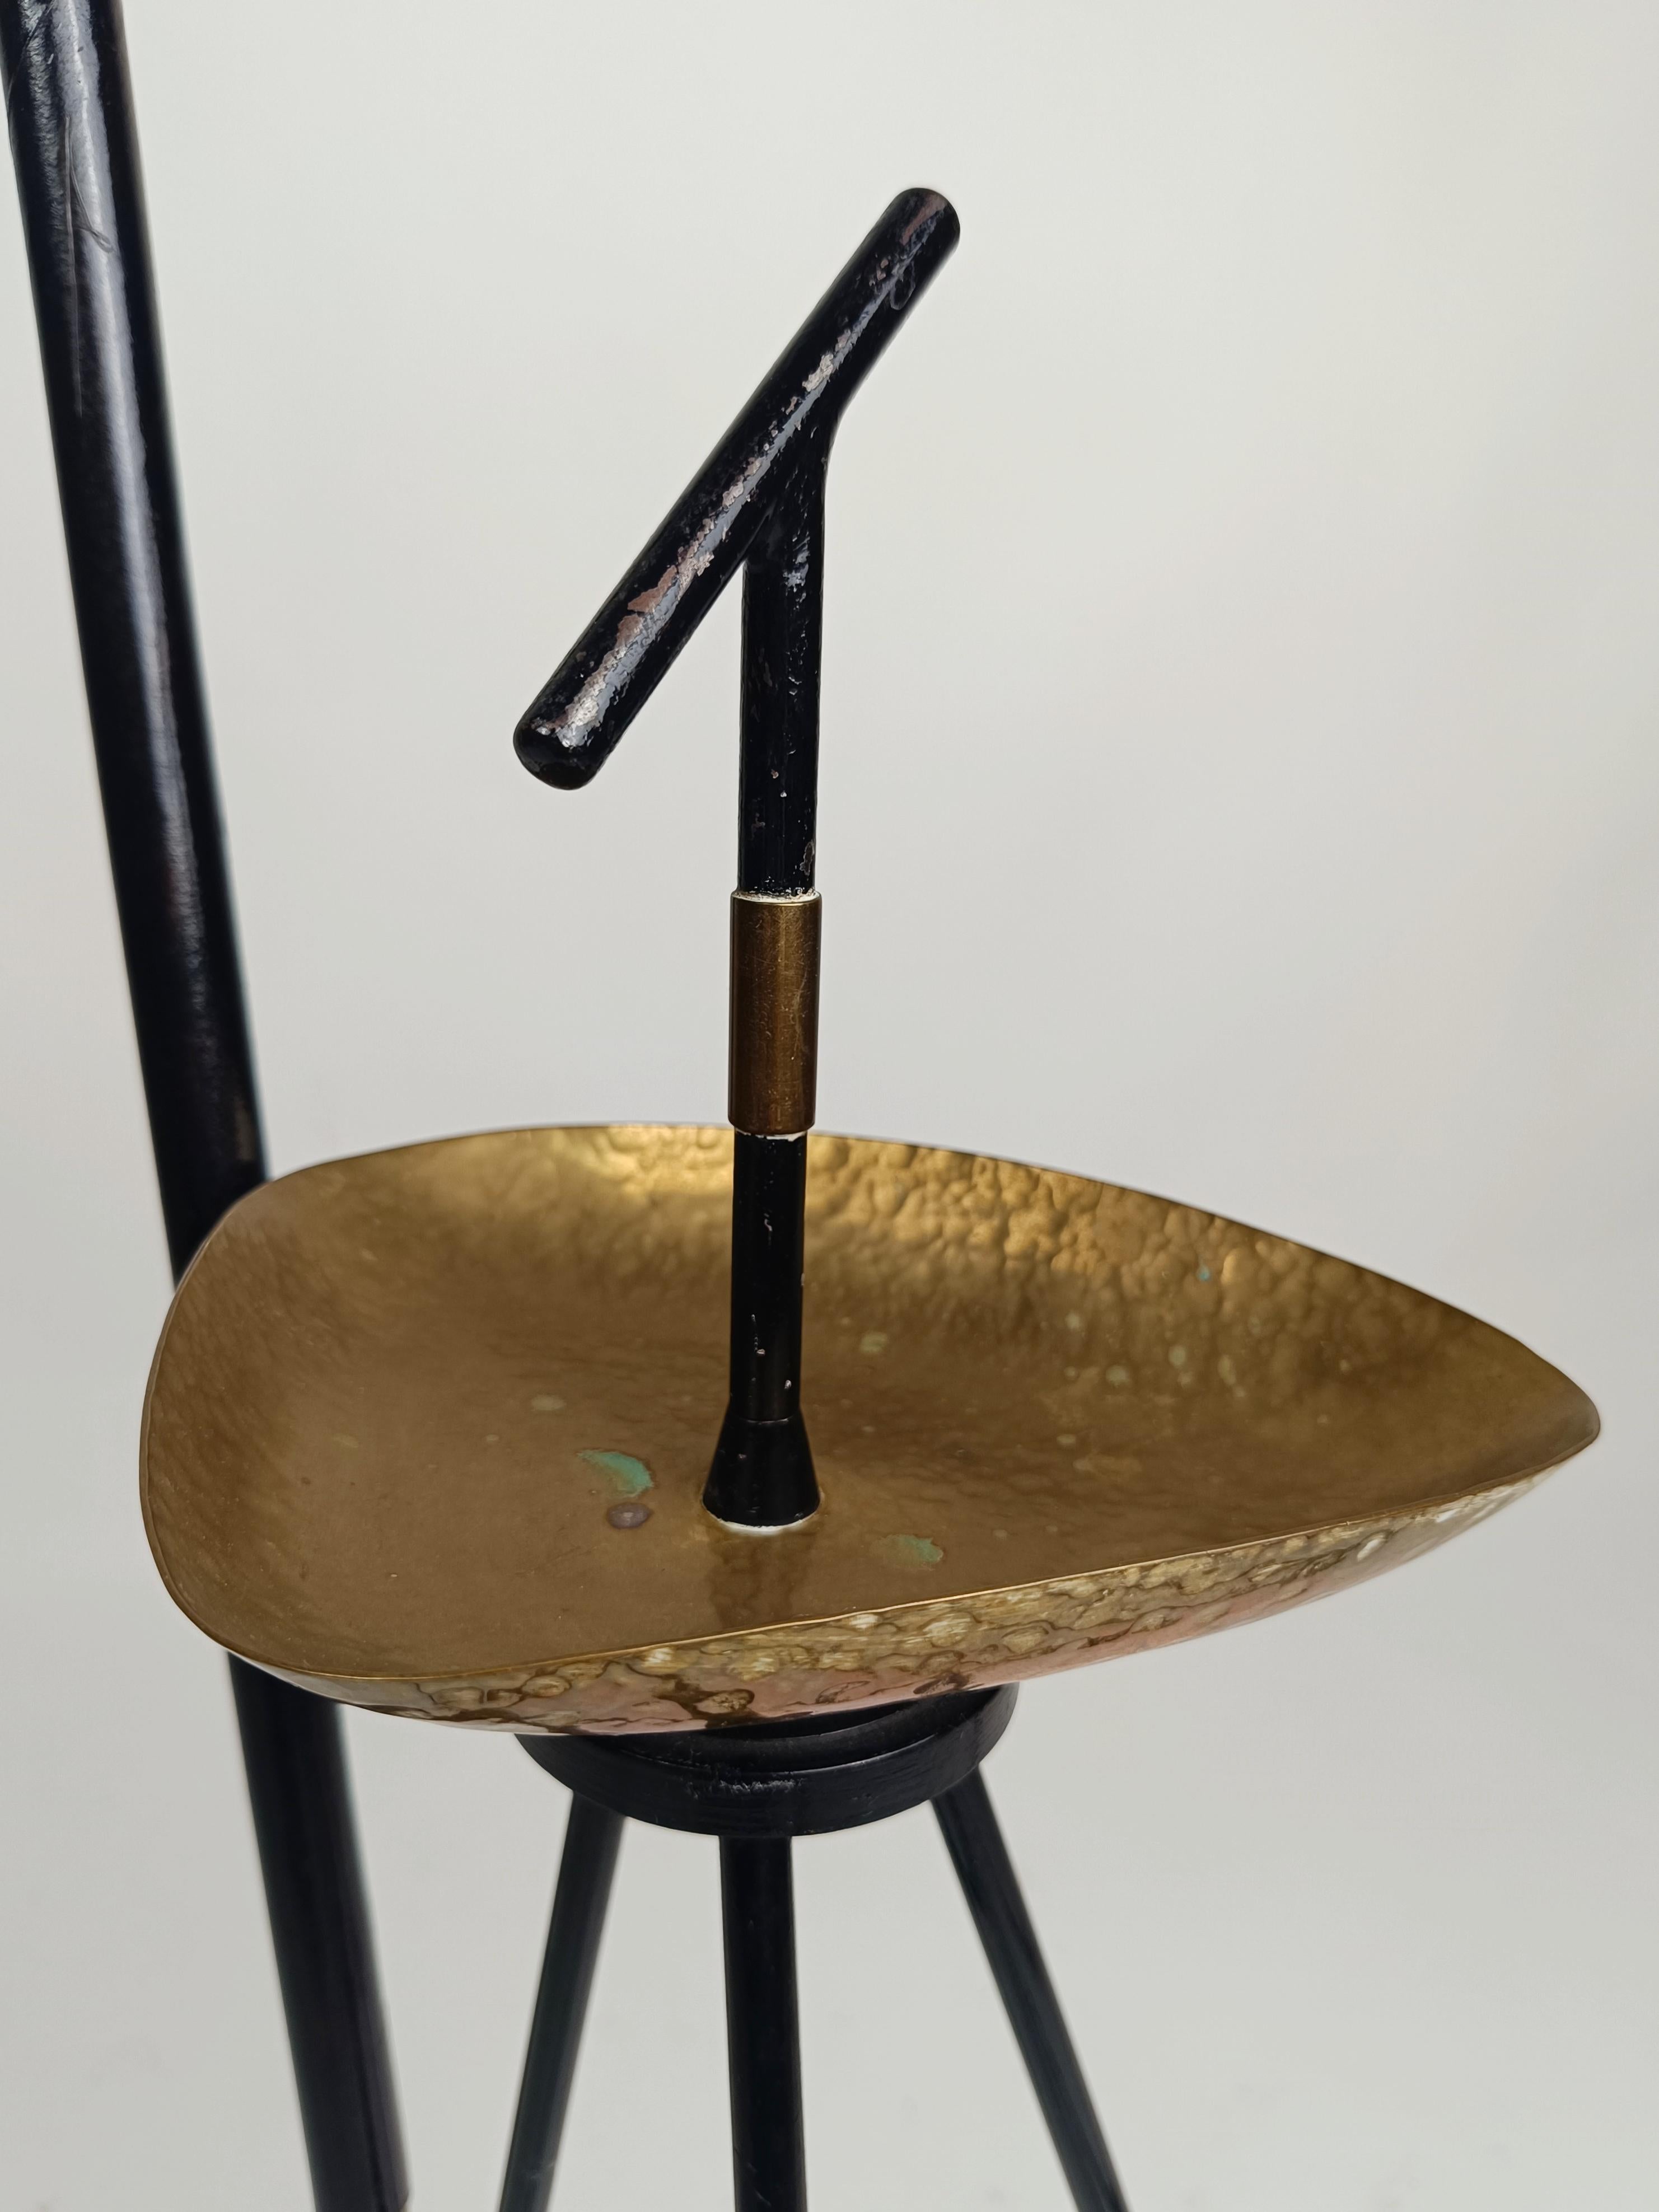 An unusual and multifunctional object, made in full mid-century Italian style.
A floor stand, magazine holder and ashtray, easily transportable throughout the house thanks to the small handle, just like the 